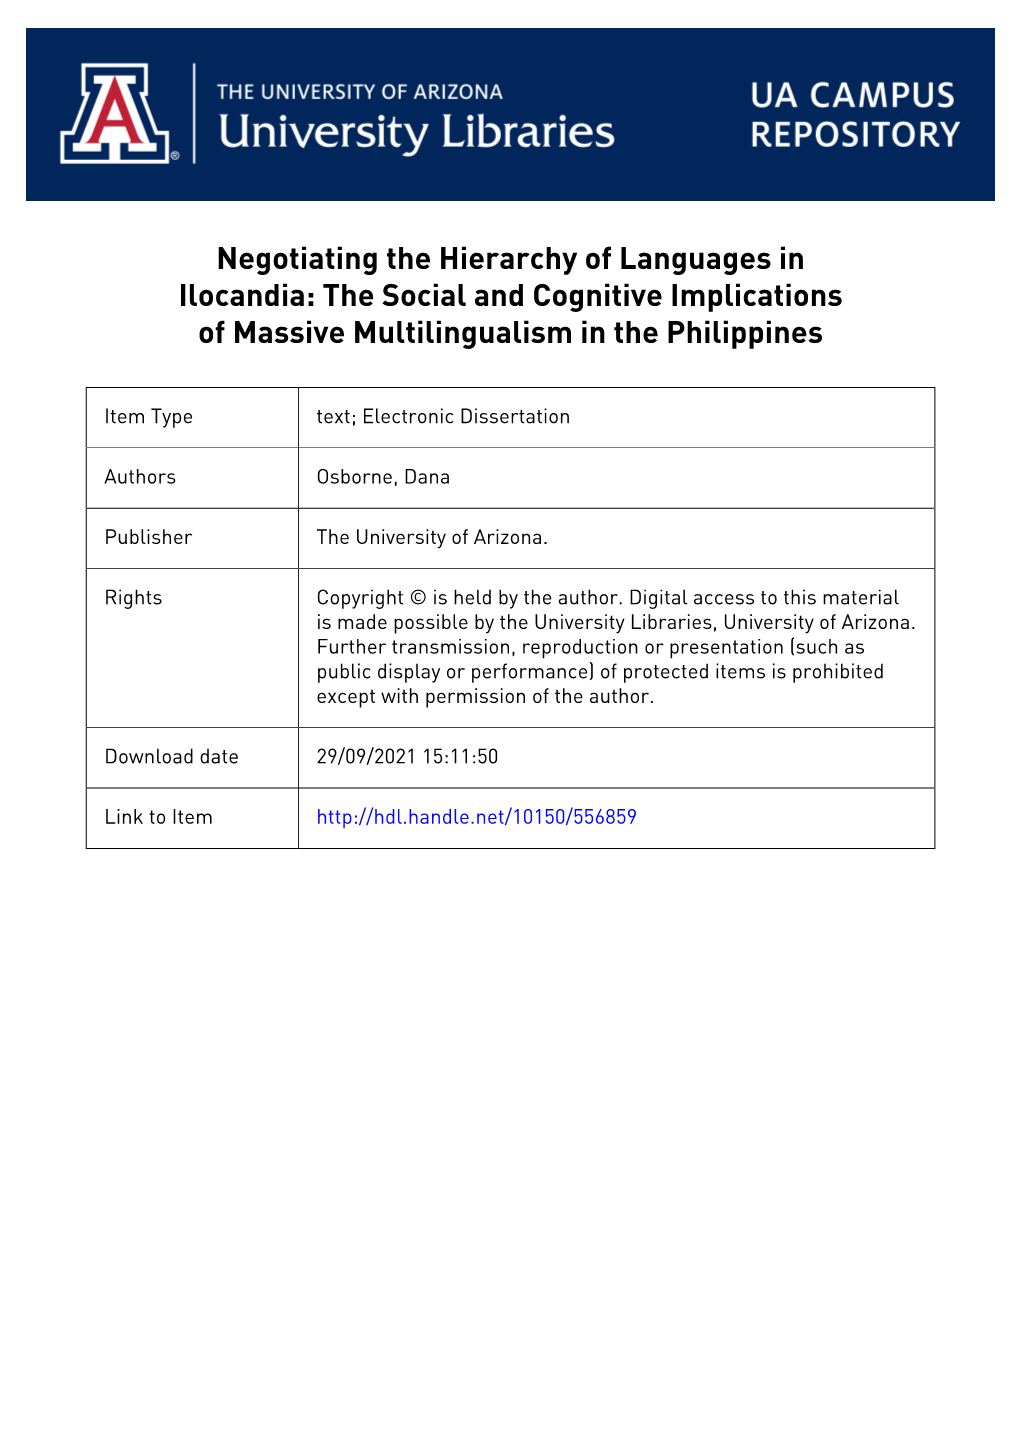 Negotiating the Hierarchy of Languages in Ilocandia: the Social and Cognitive Implications of Massive Multilingualism in the Philippines